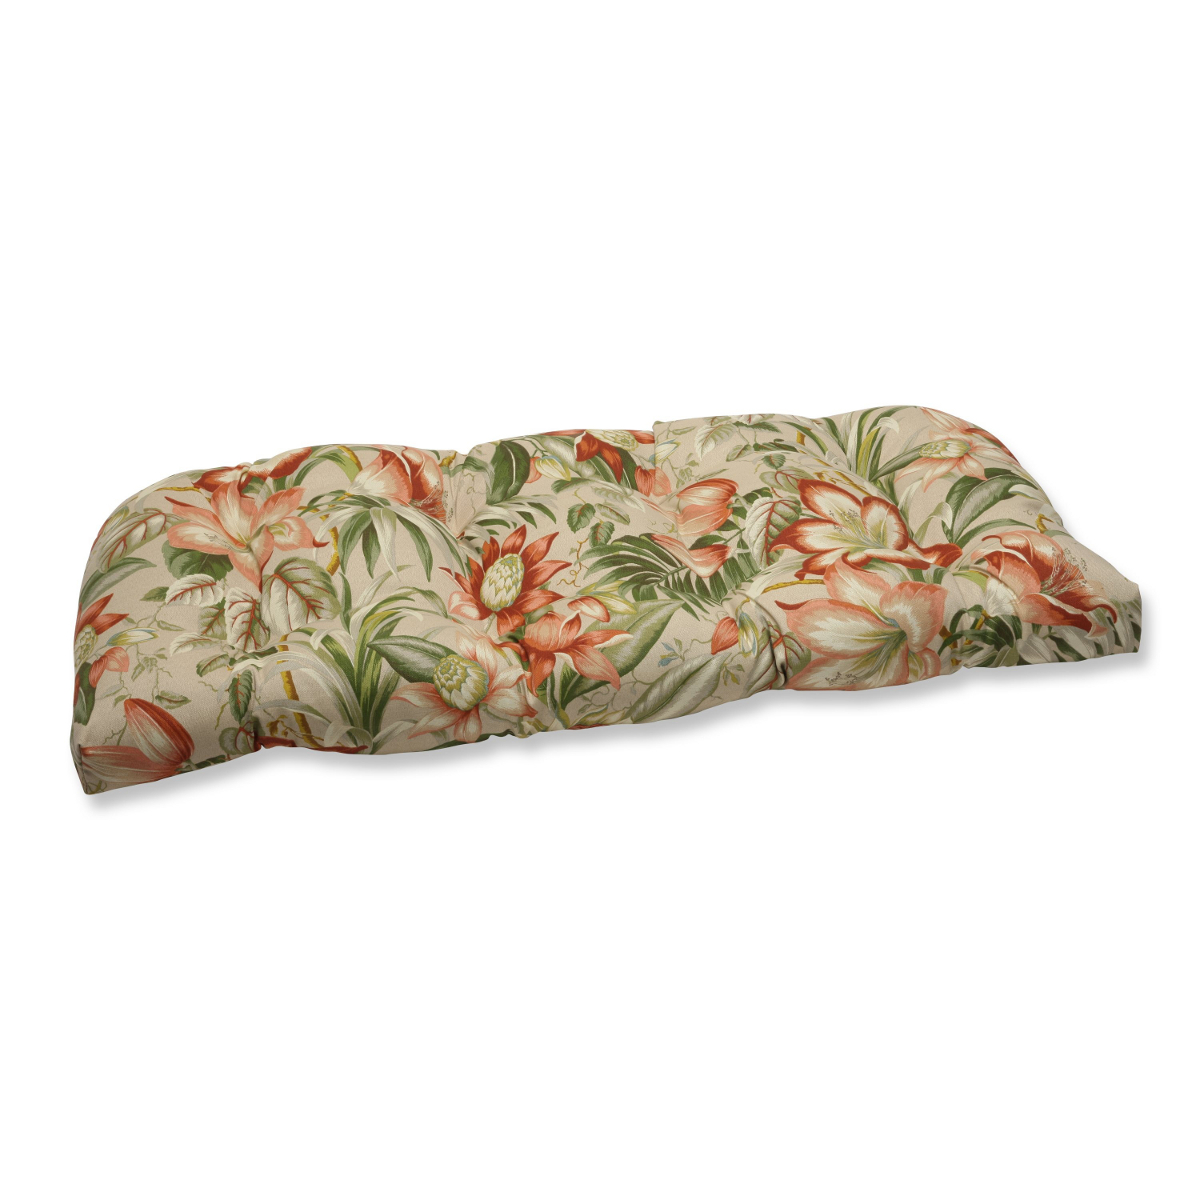 Pillow Perfect 44" Green and Red Tropical Garden Decorative Outdoor Patio Wicker Loveseat Cushion